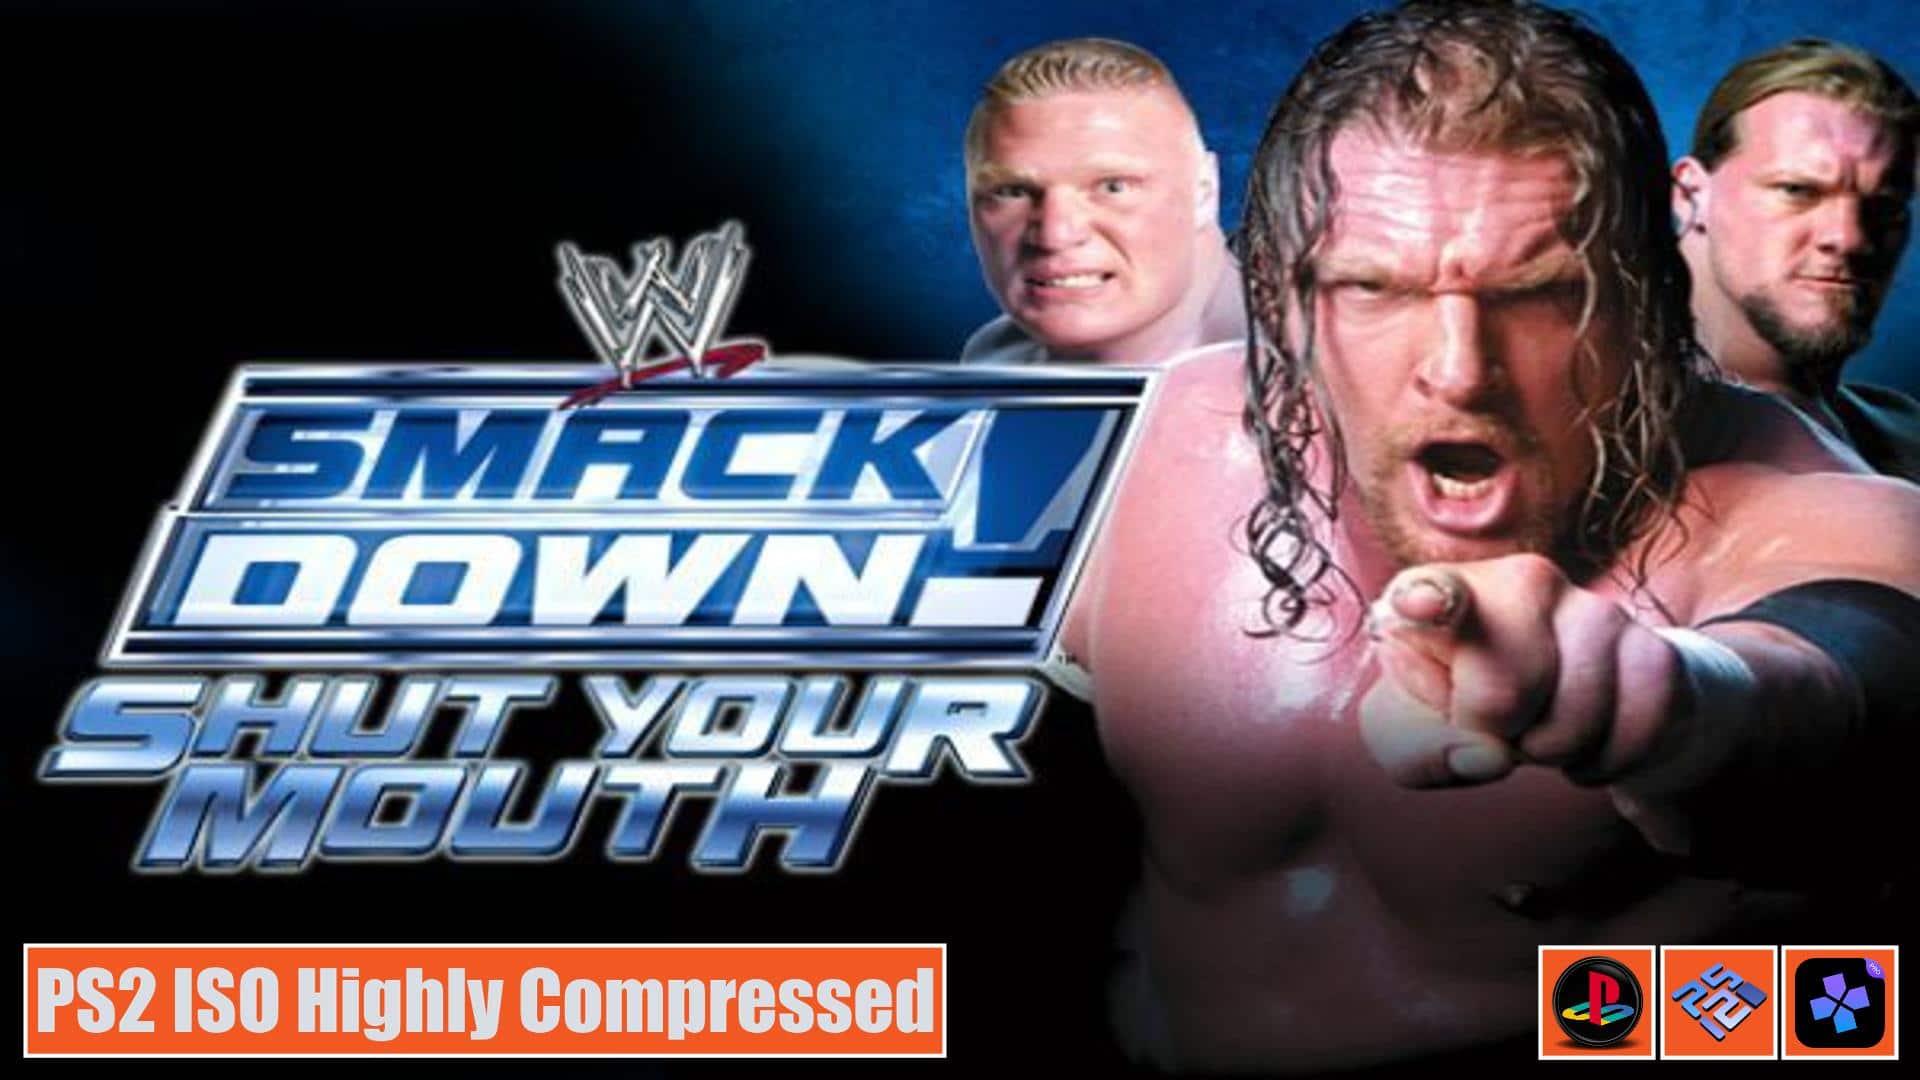 wwe raw 2002 game highly compressed